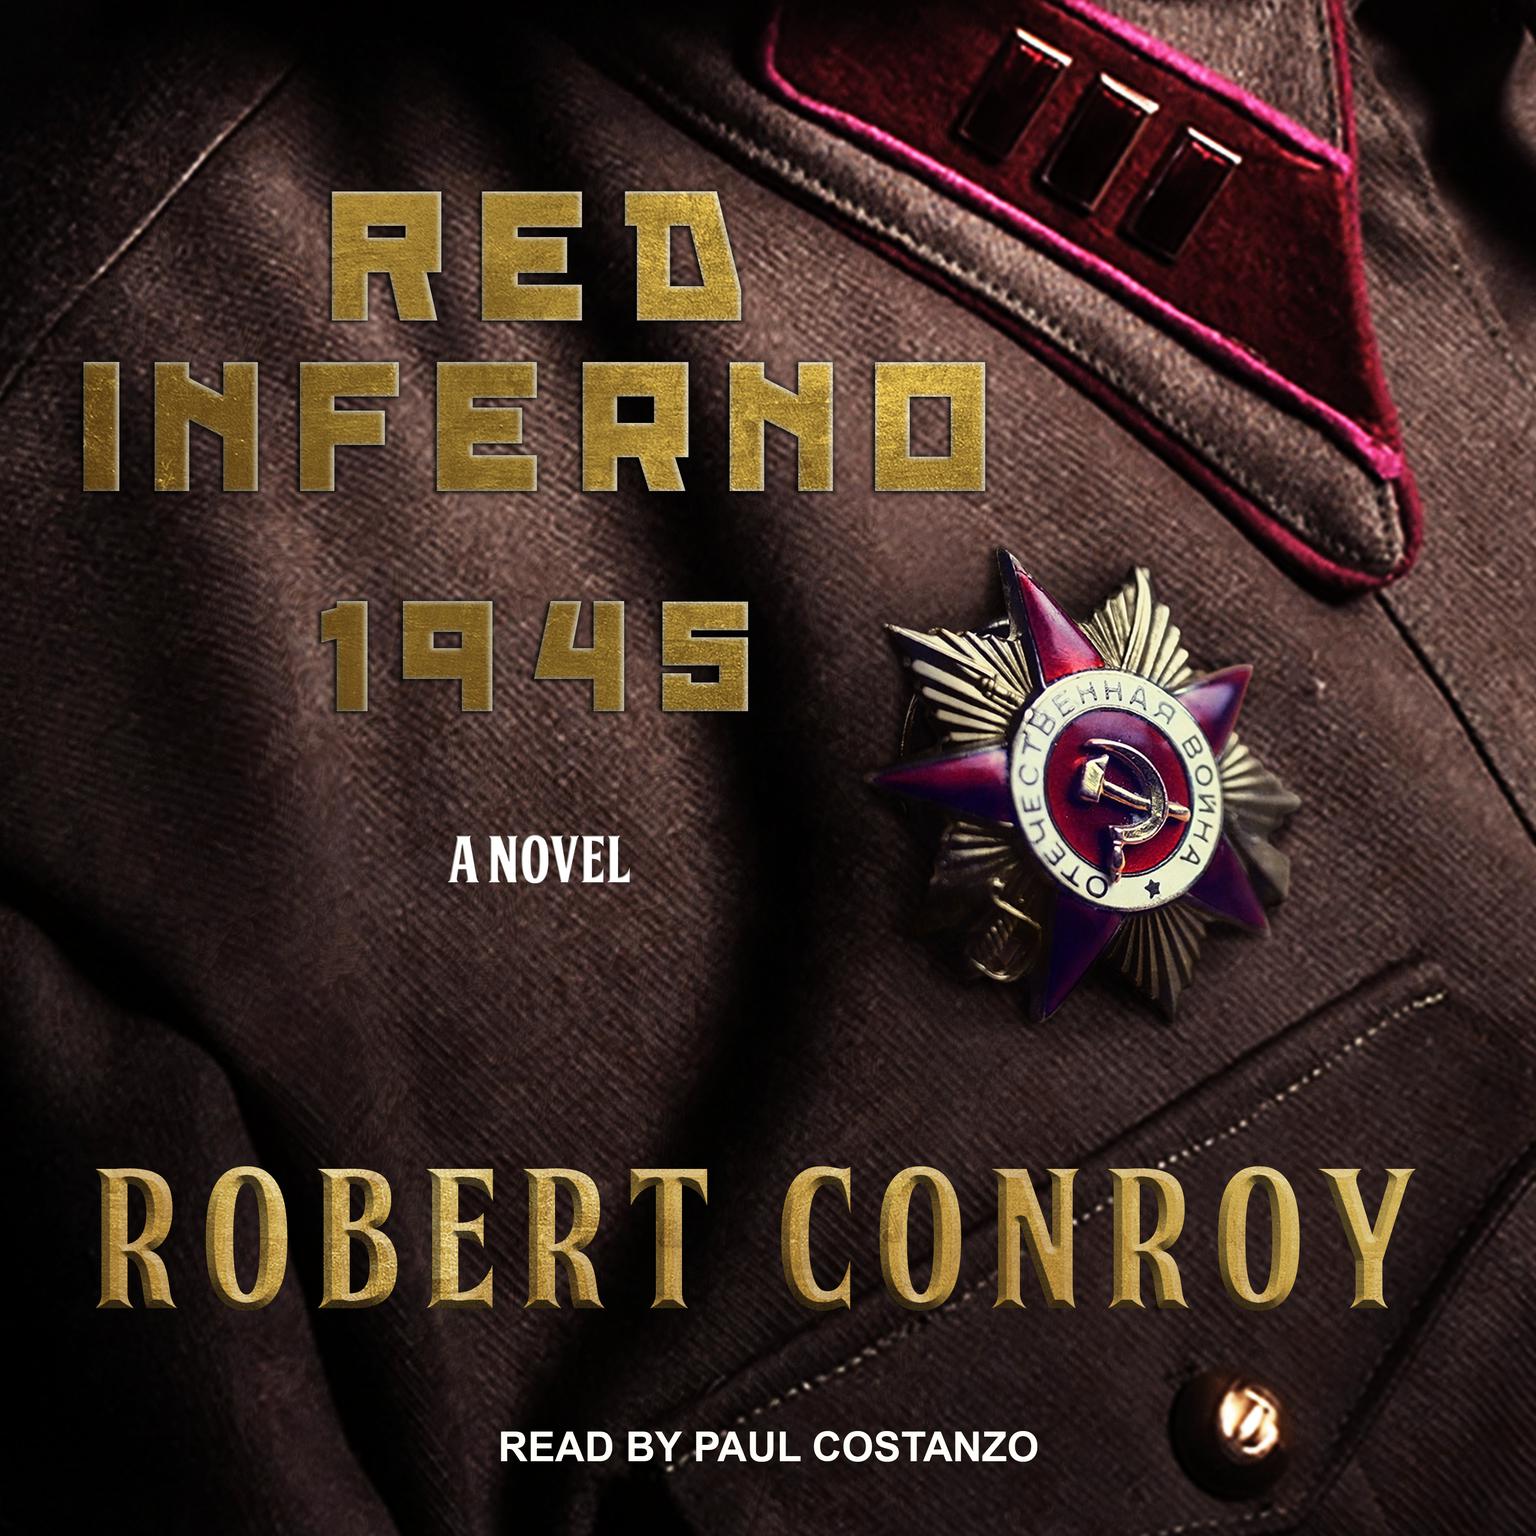 Red Inferno: 1945 Audiobook, by Robert Conroy